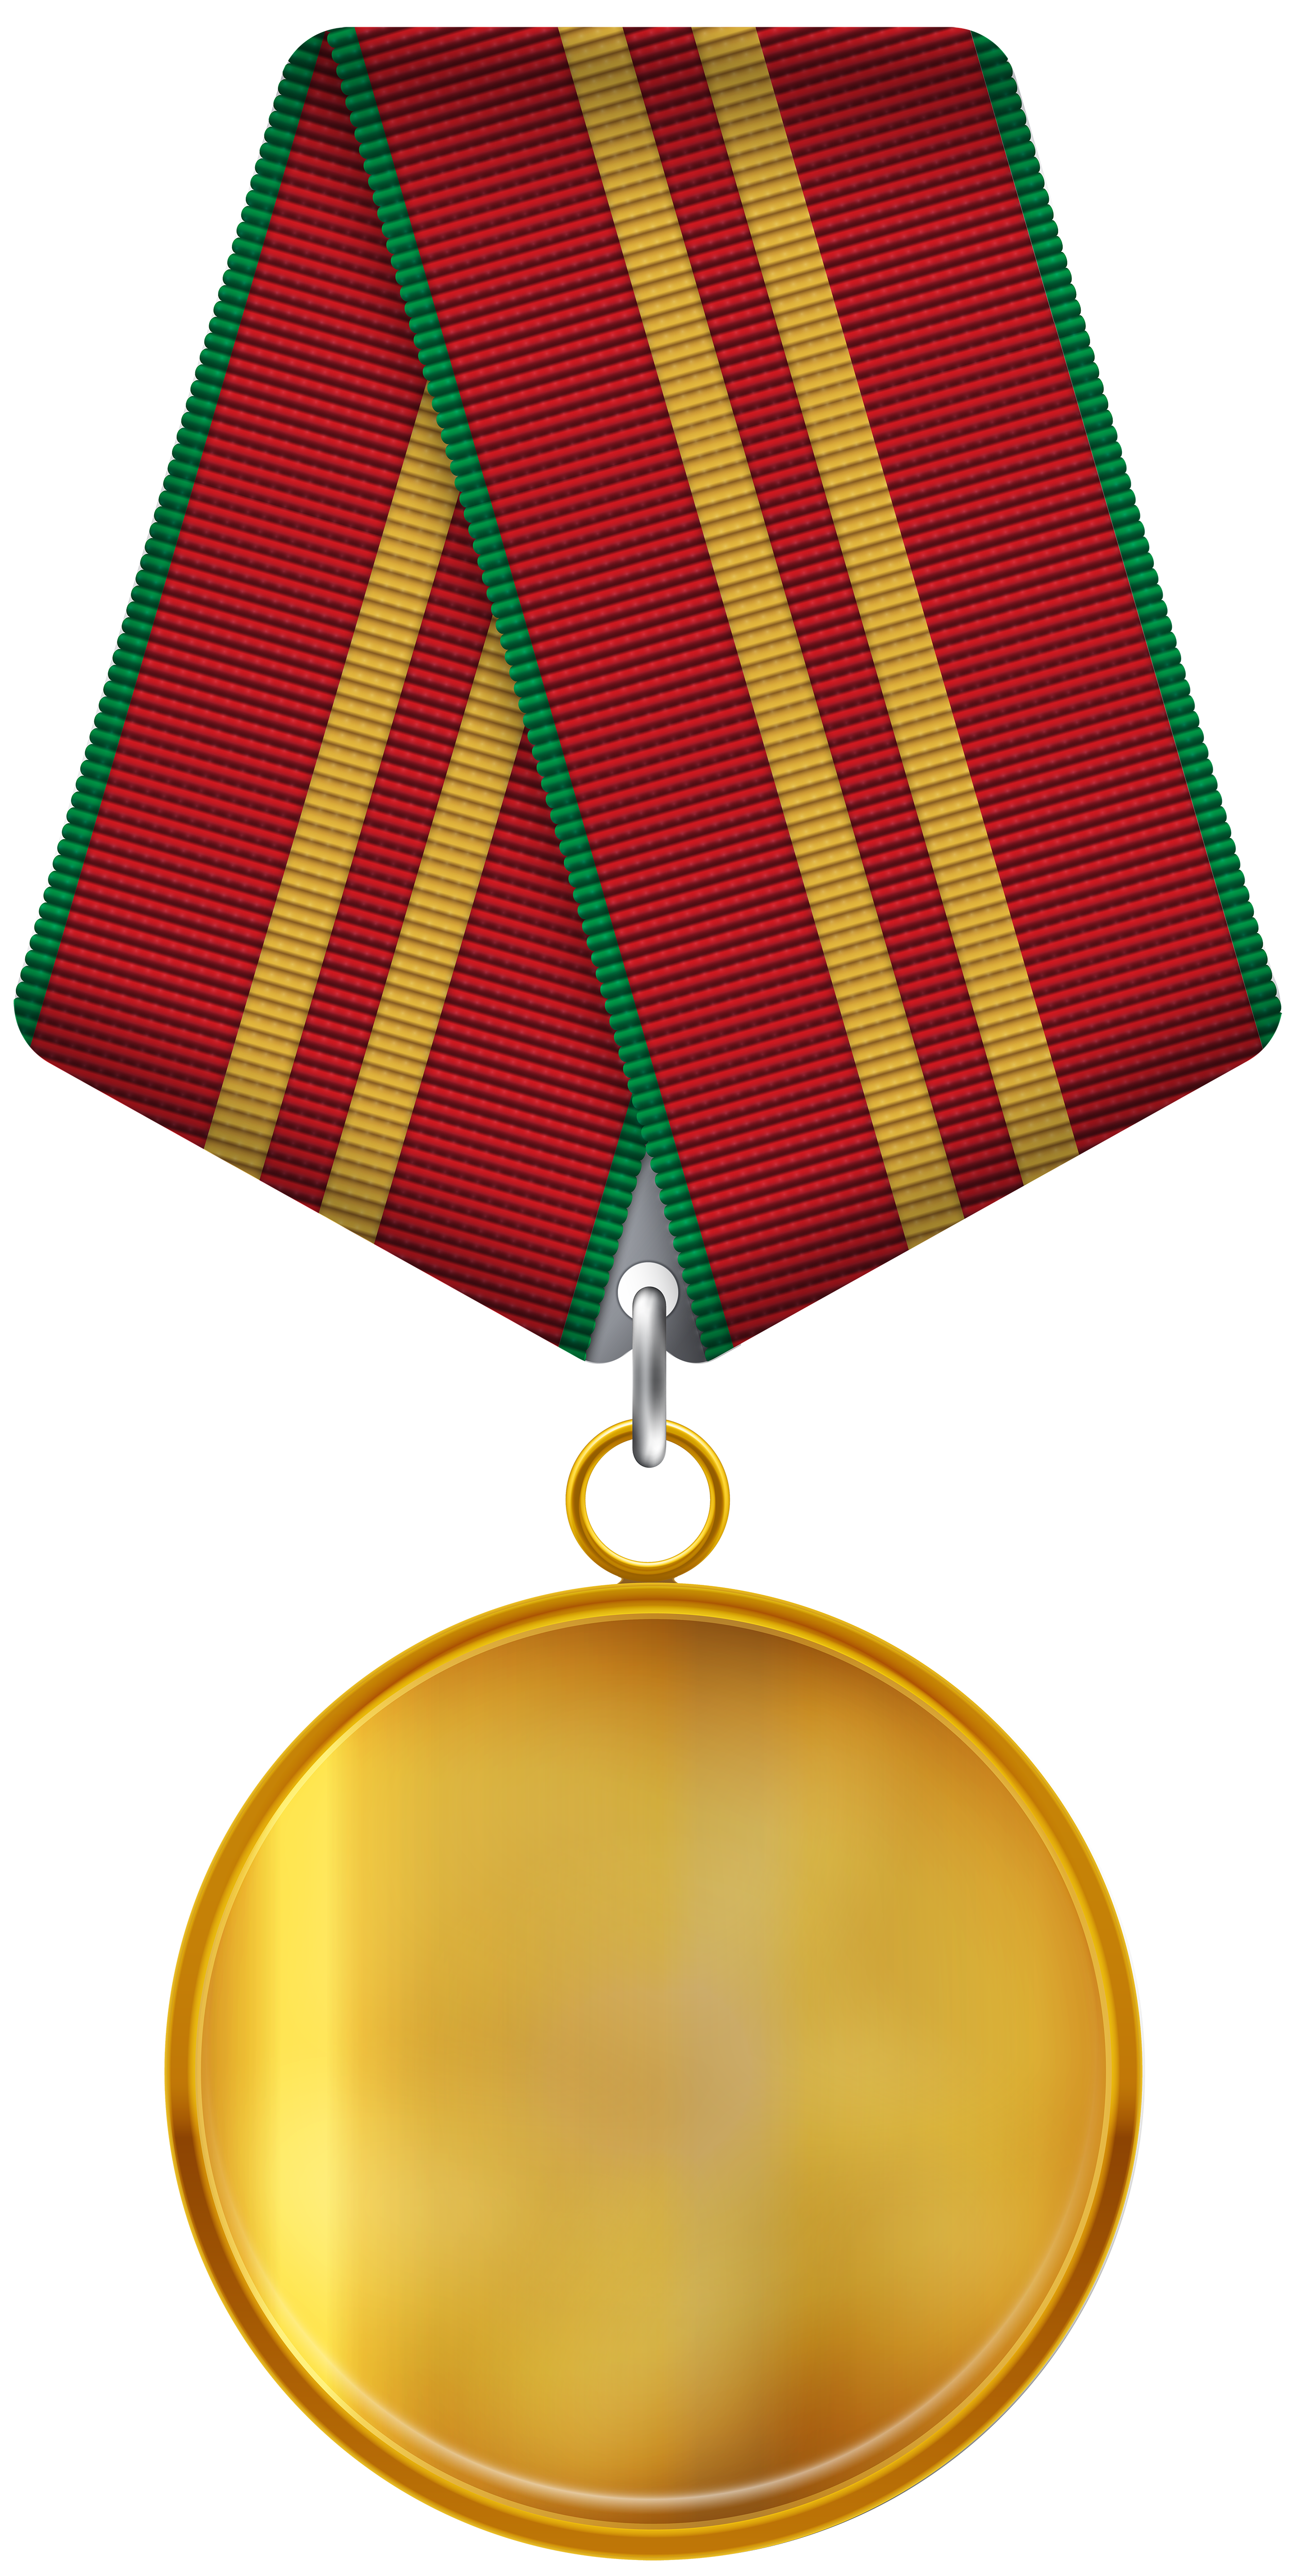 free clipart of medals - photo #48